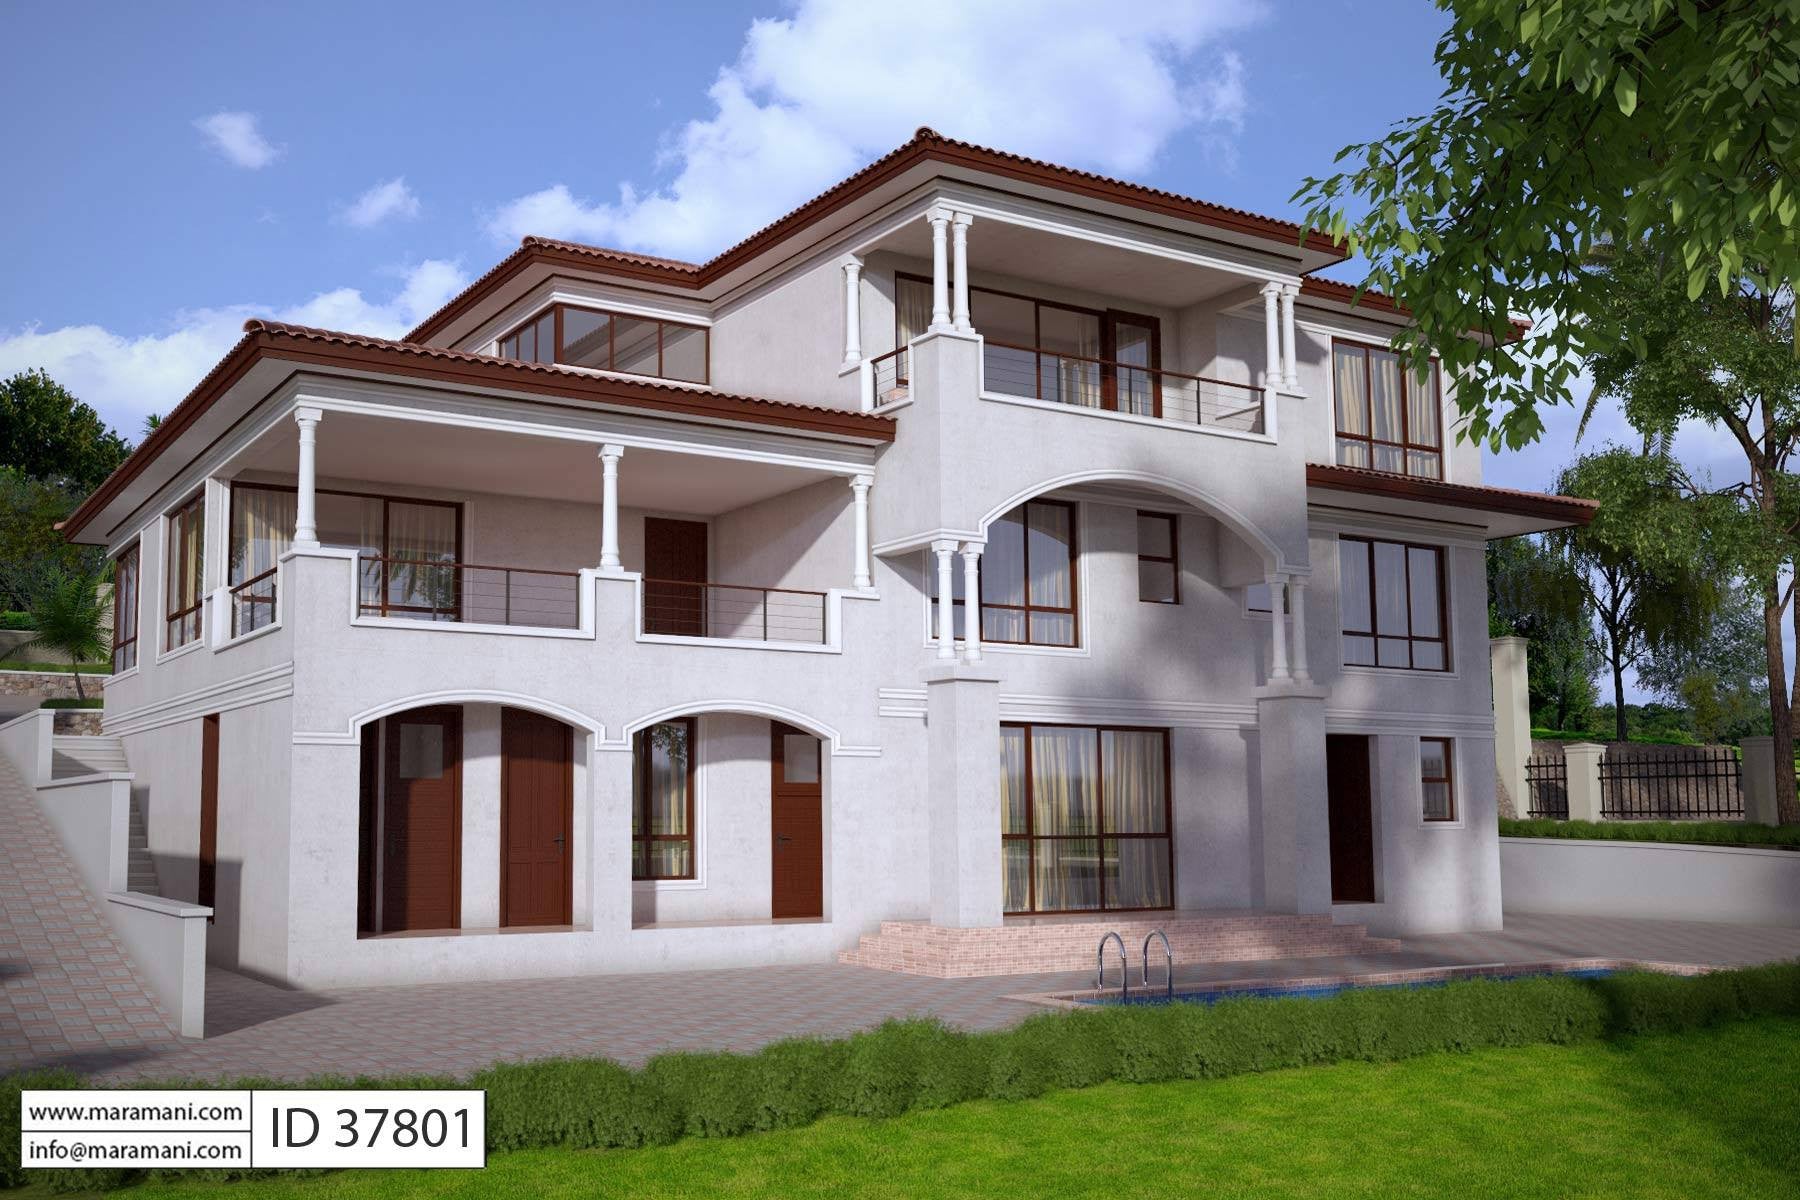 7 Bedroom House Design - Id 37801 - House Designs By Maramani